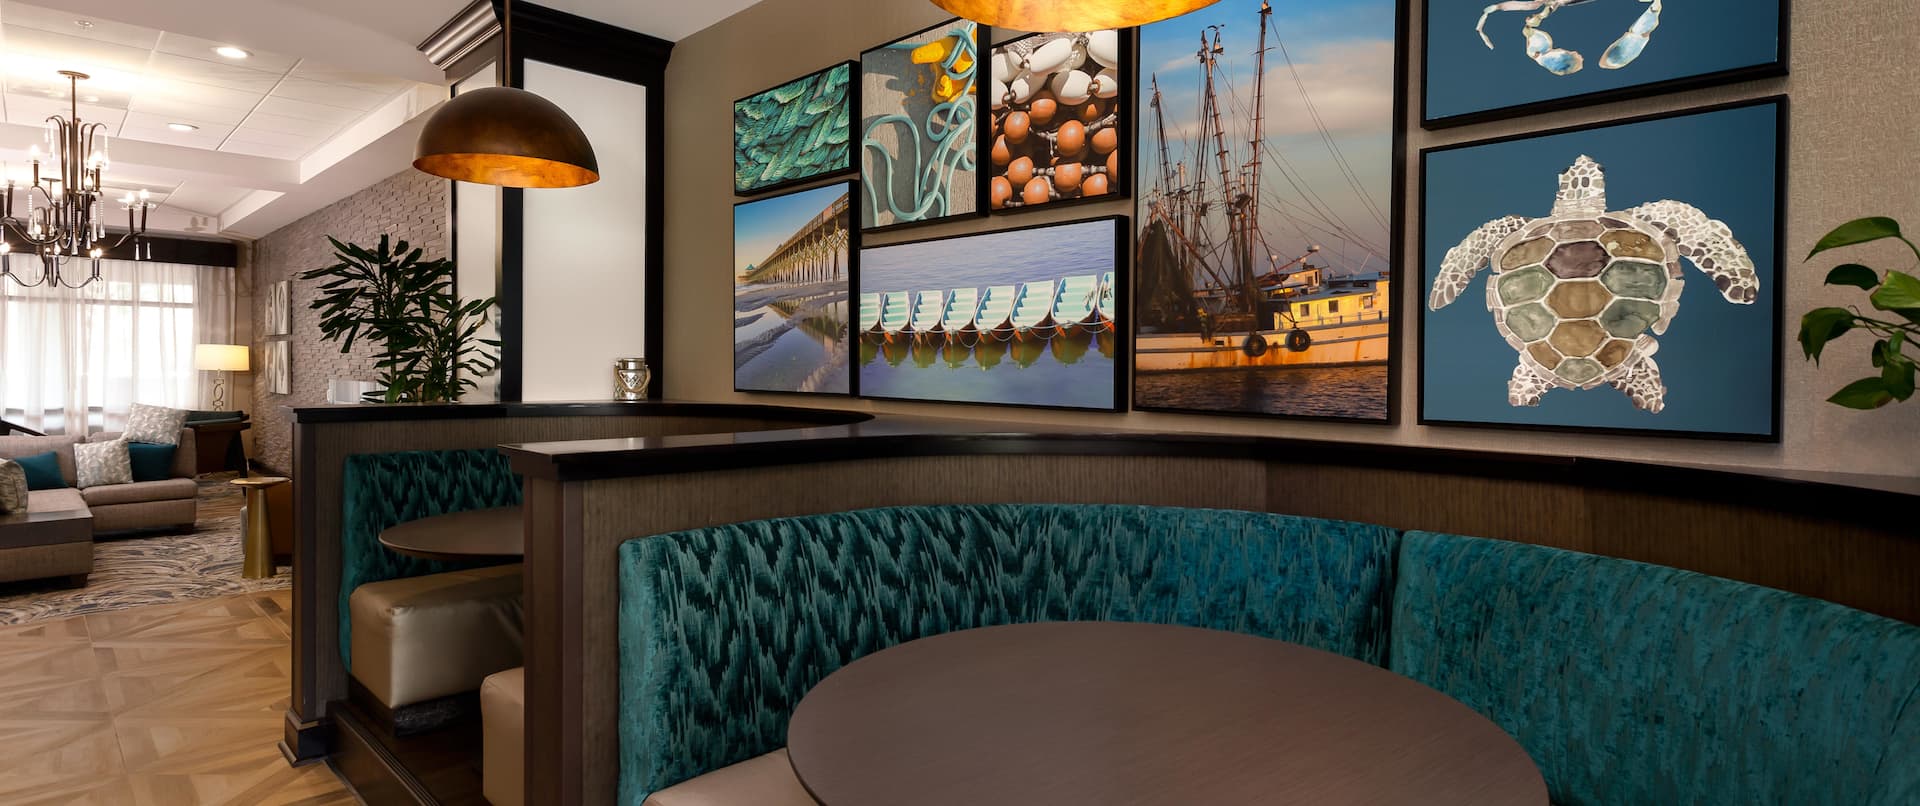 Hotel Restaurant Booth and Wall Art